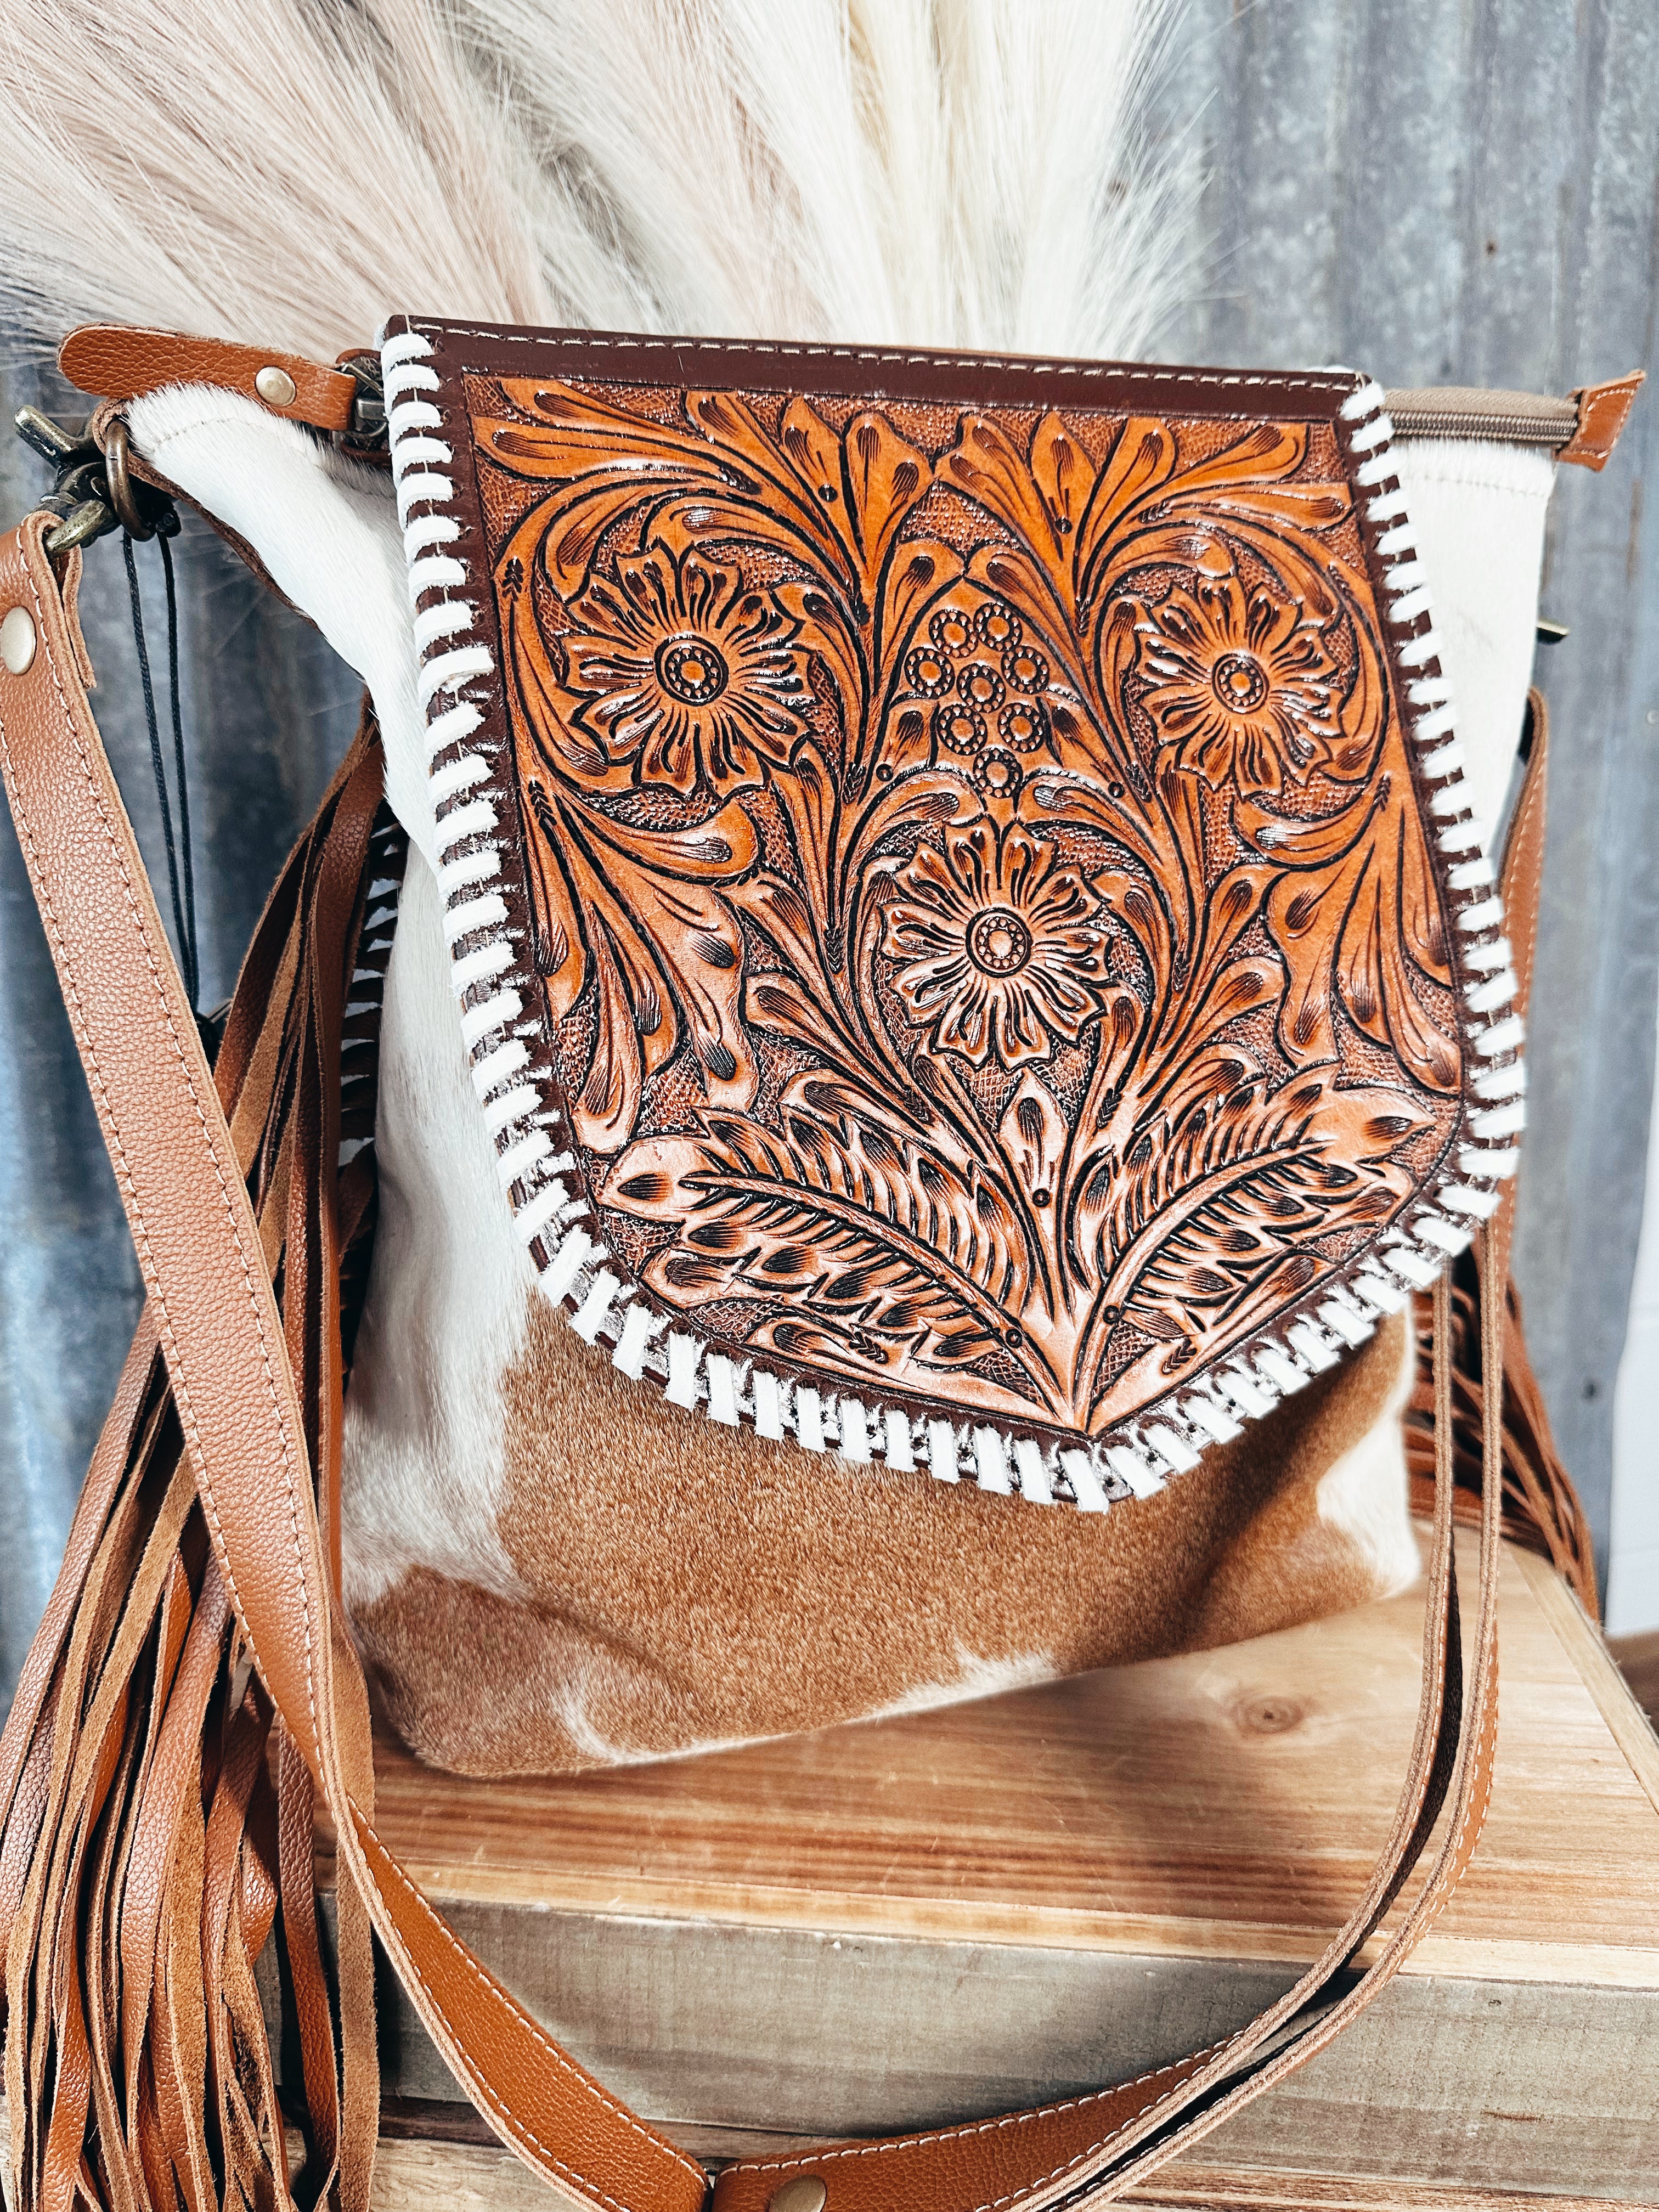 The Squander Hand-Tooled  Bag